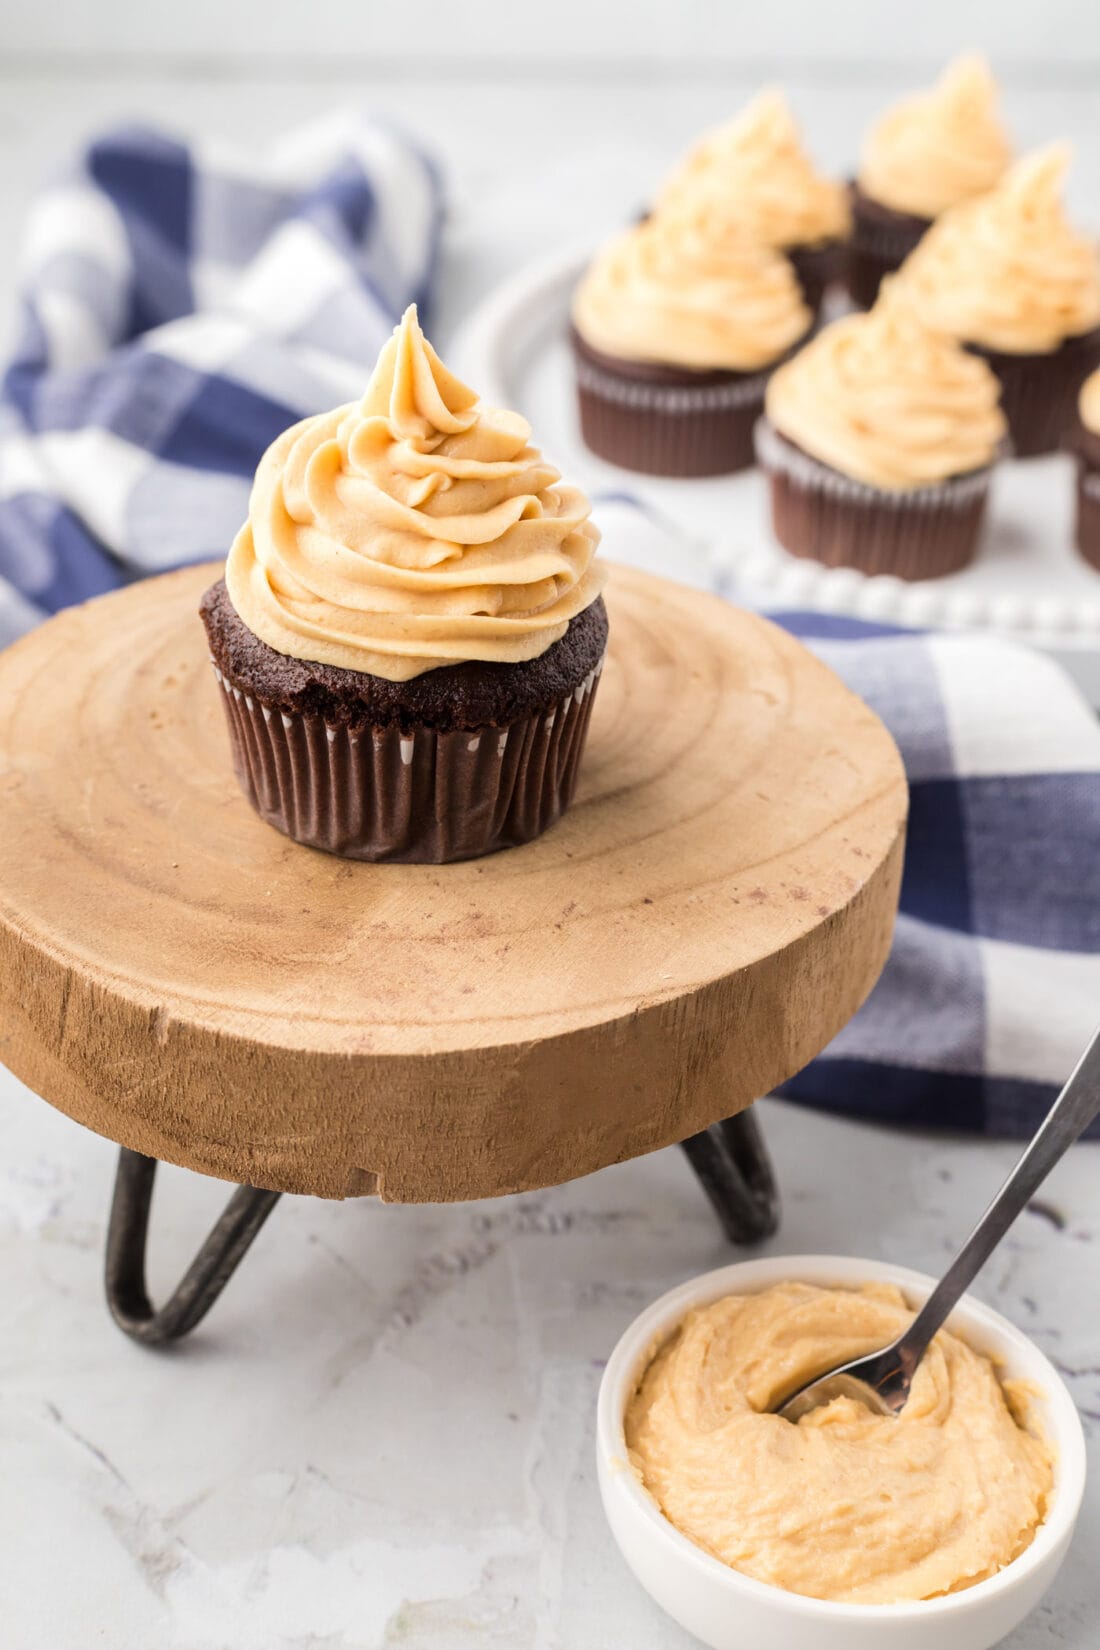 Cupcakes topped with Peanut Butter Frosting and a bowl of frosting on the side